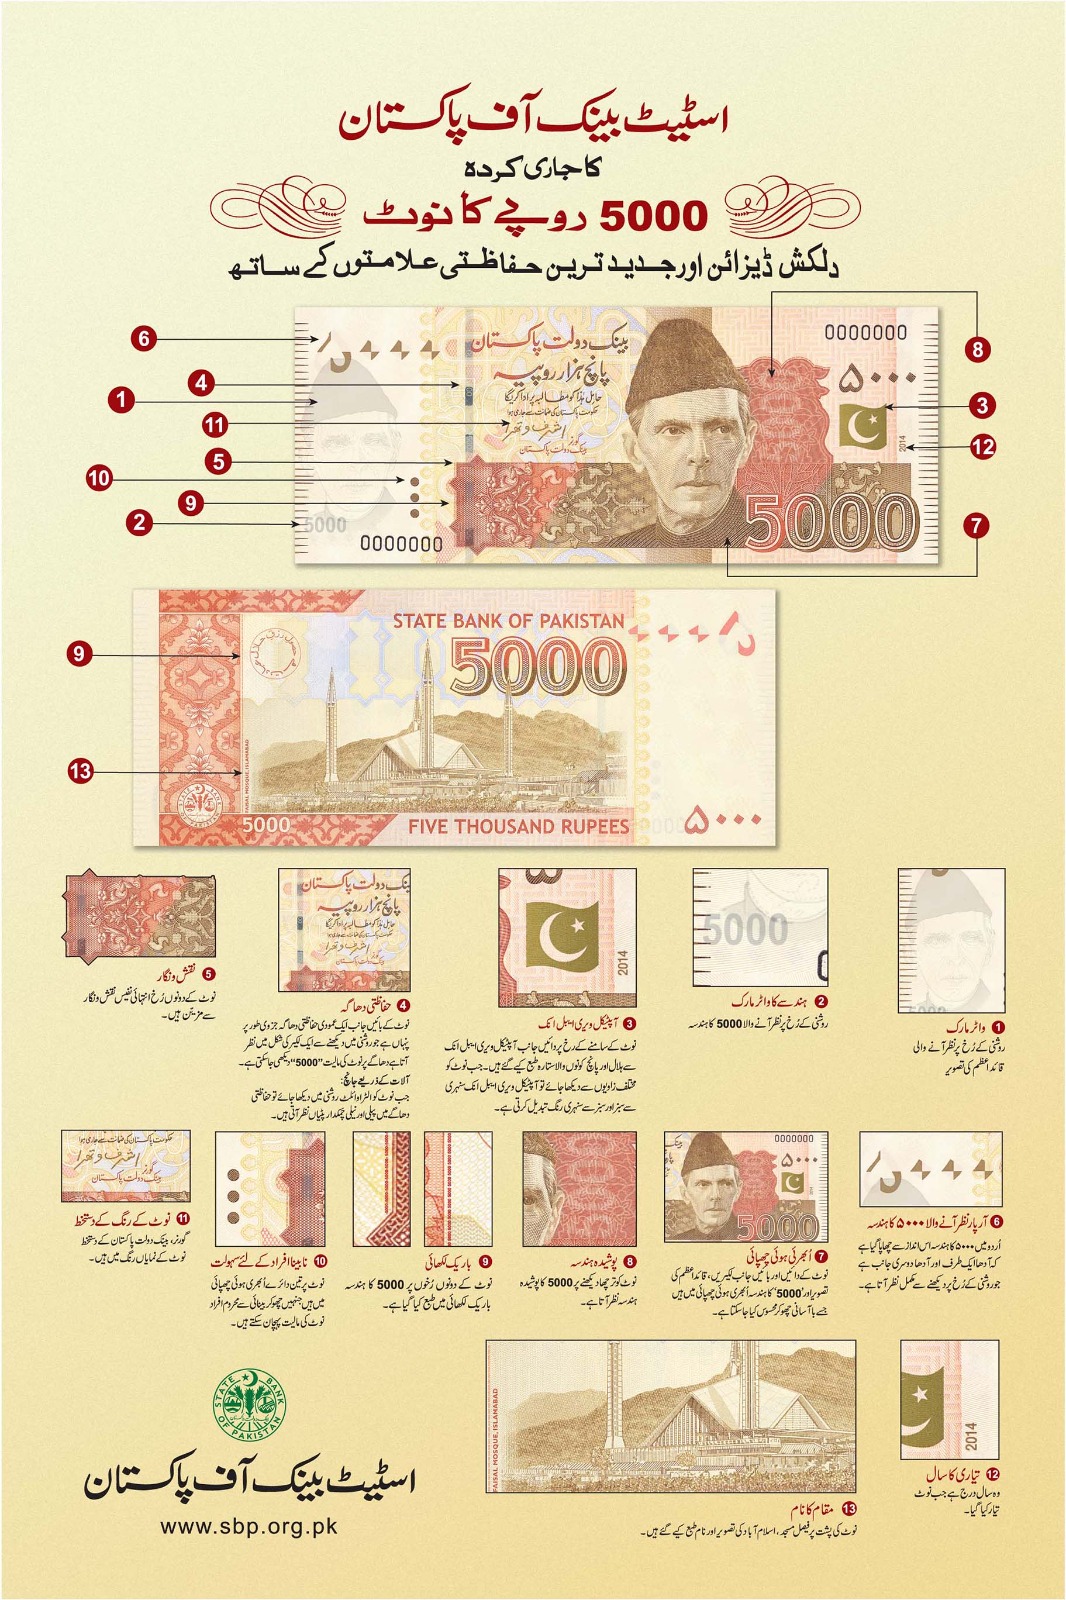 Securety features of Rs.5000 currency note in Pakistan.